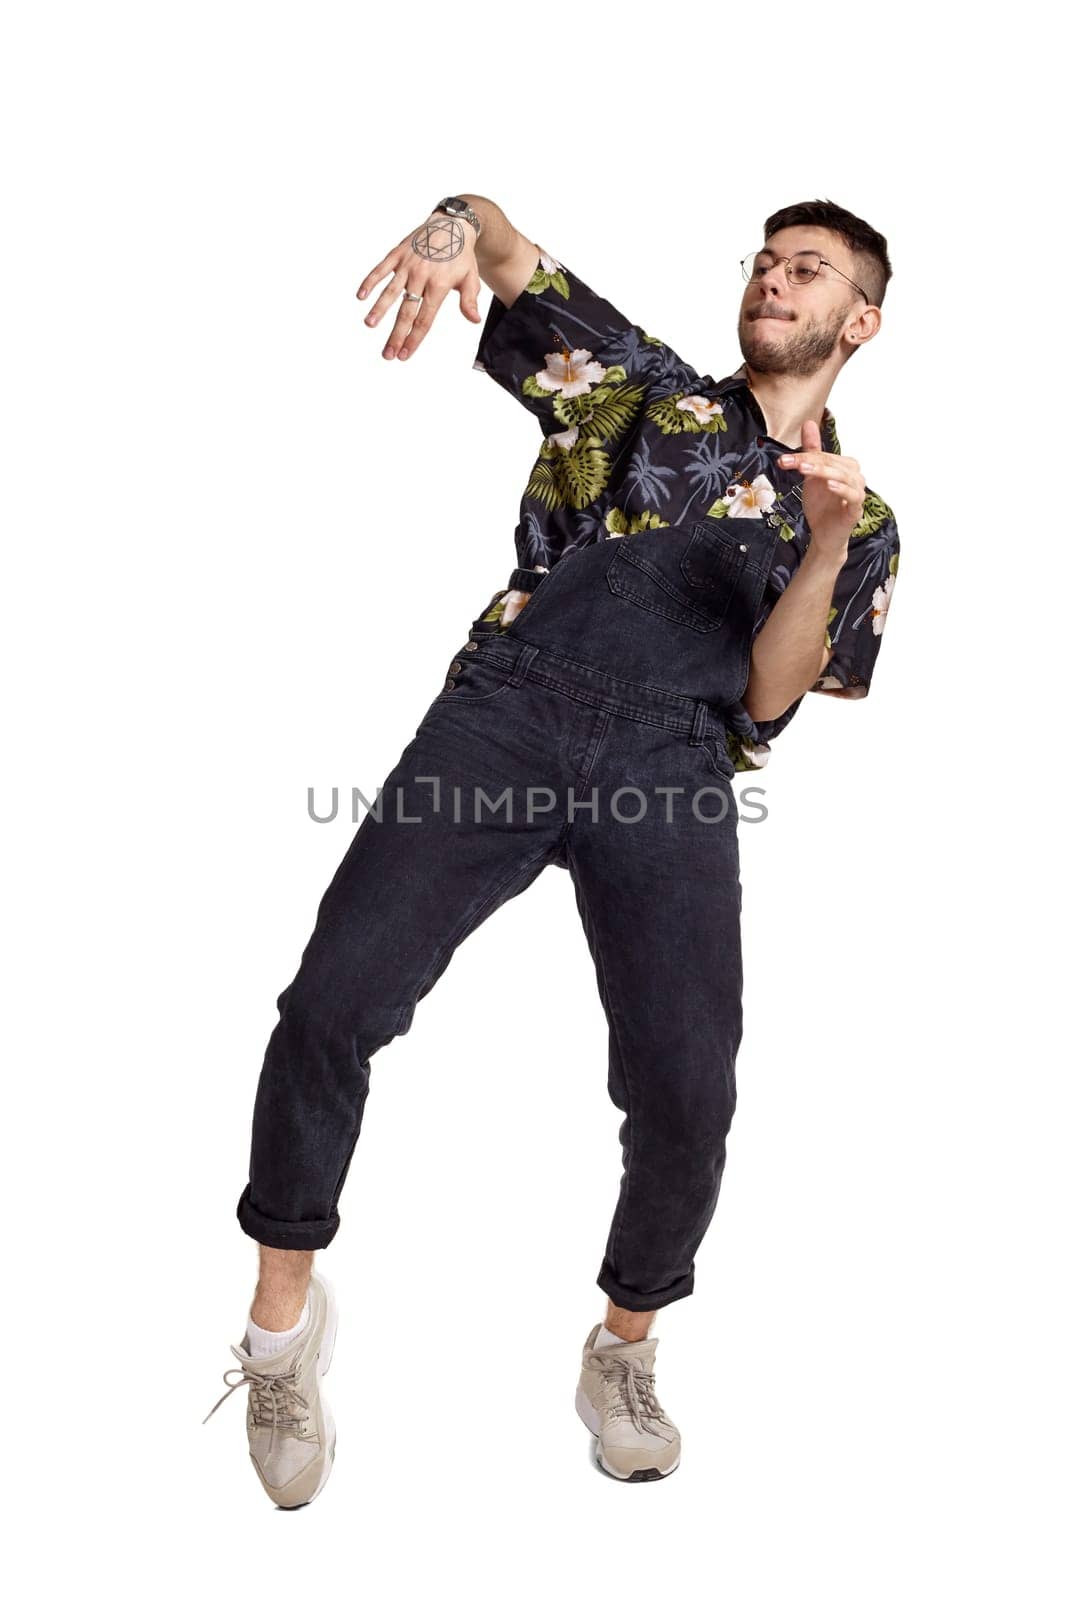 Full-length portrait of an athletic person in glasses, black jumpsuit, colorful t-shirt and gray sneakers fooling around in studio. Indoor photo of a man dancing isolated on white background. Music and imagination concept.